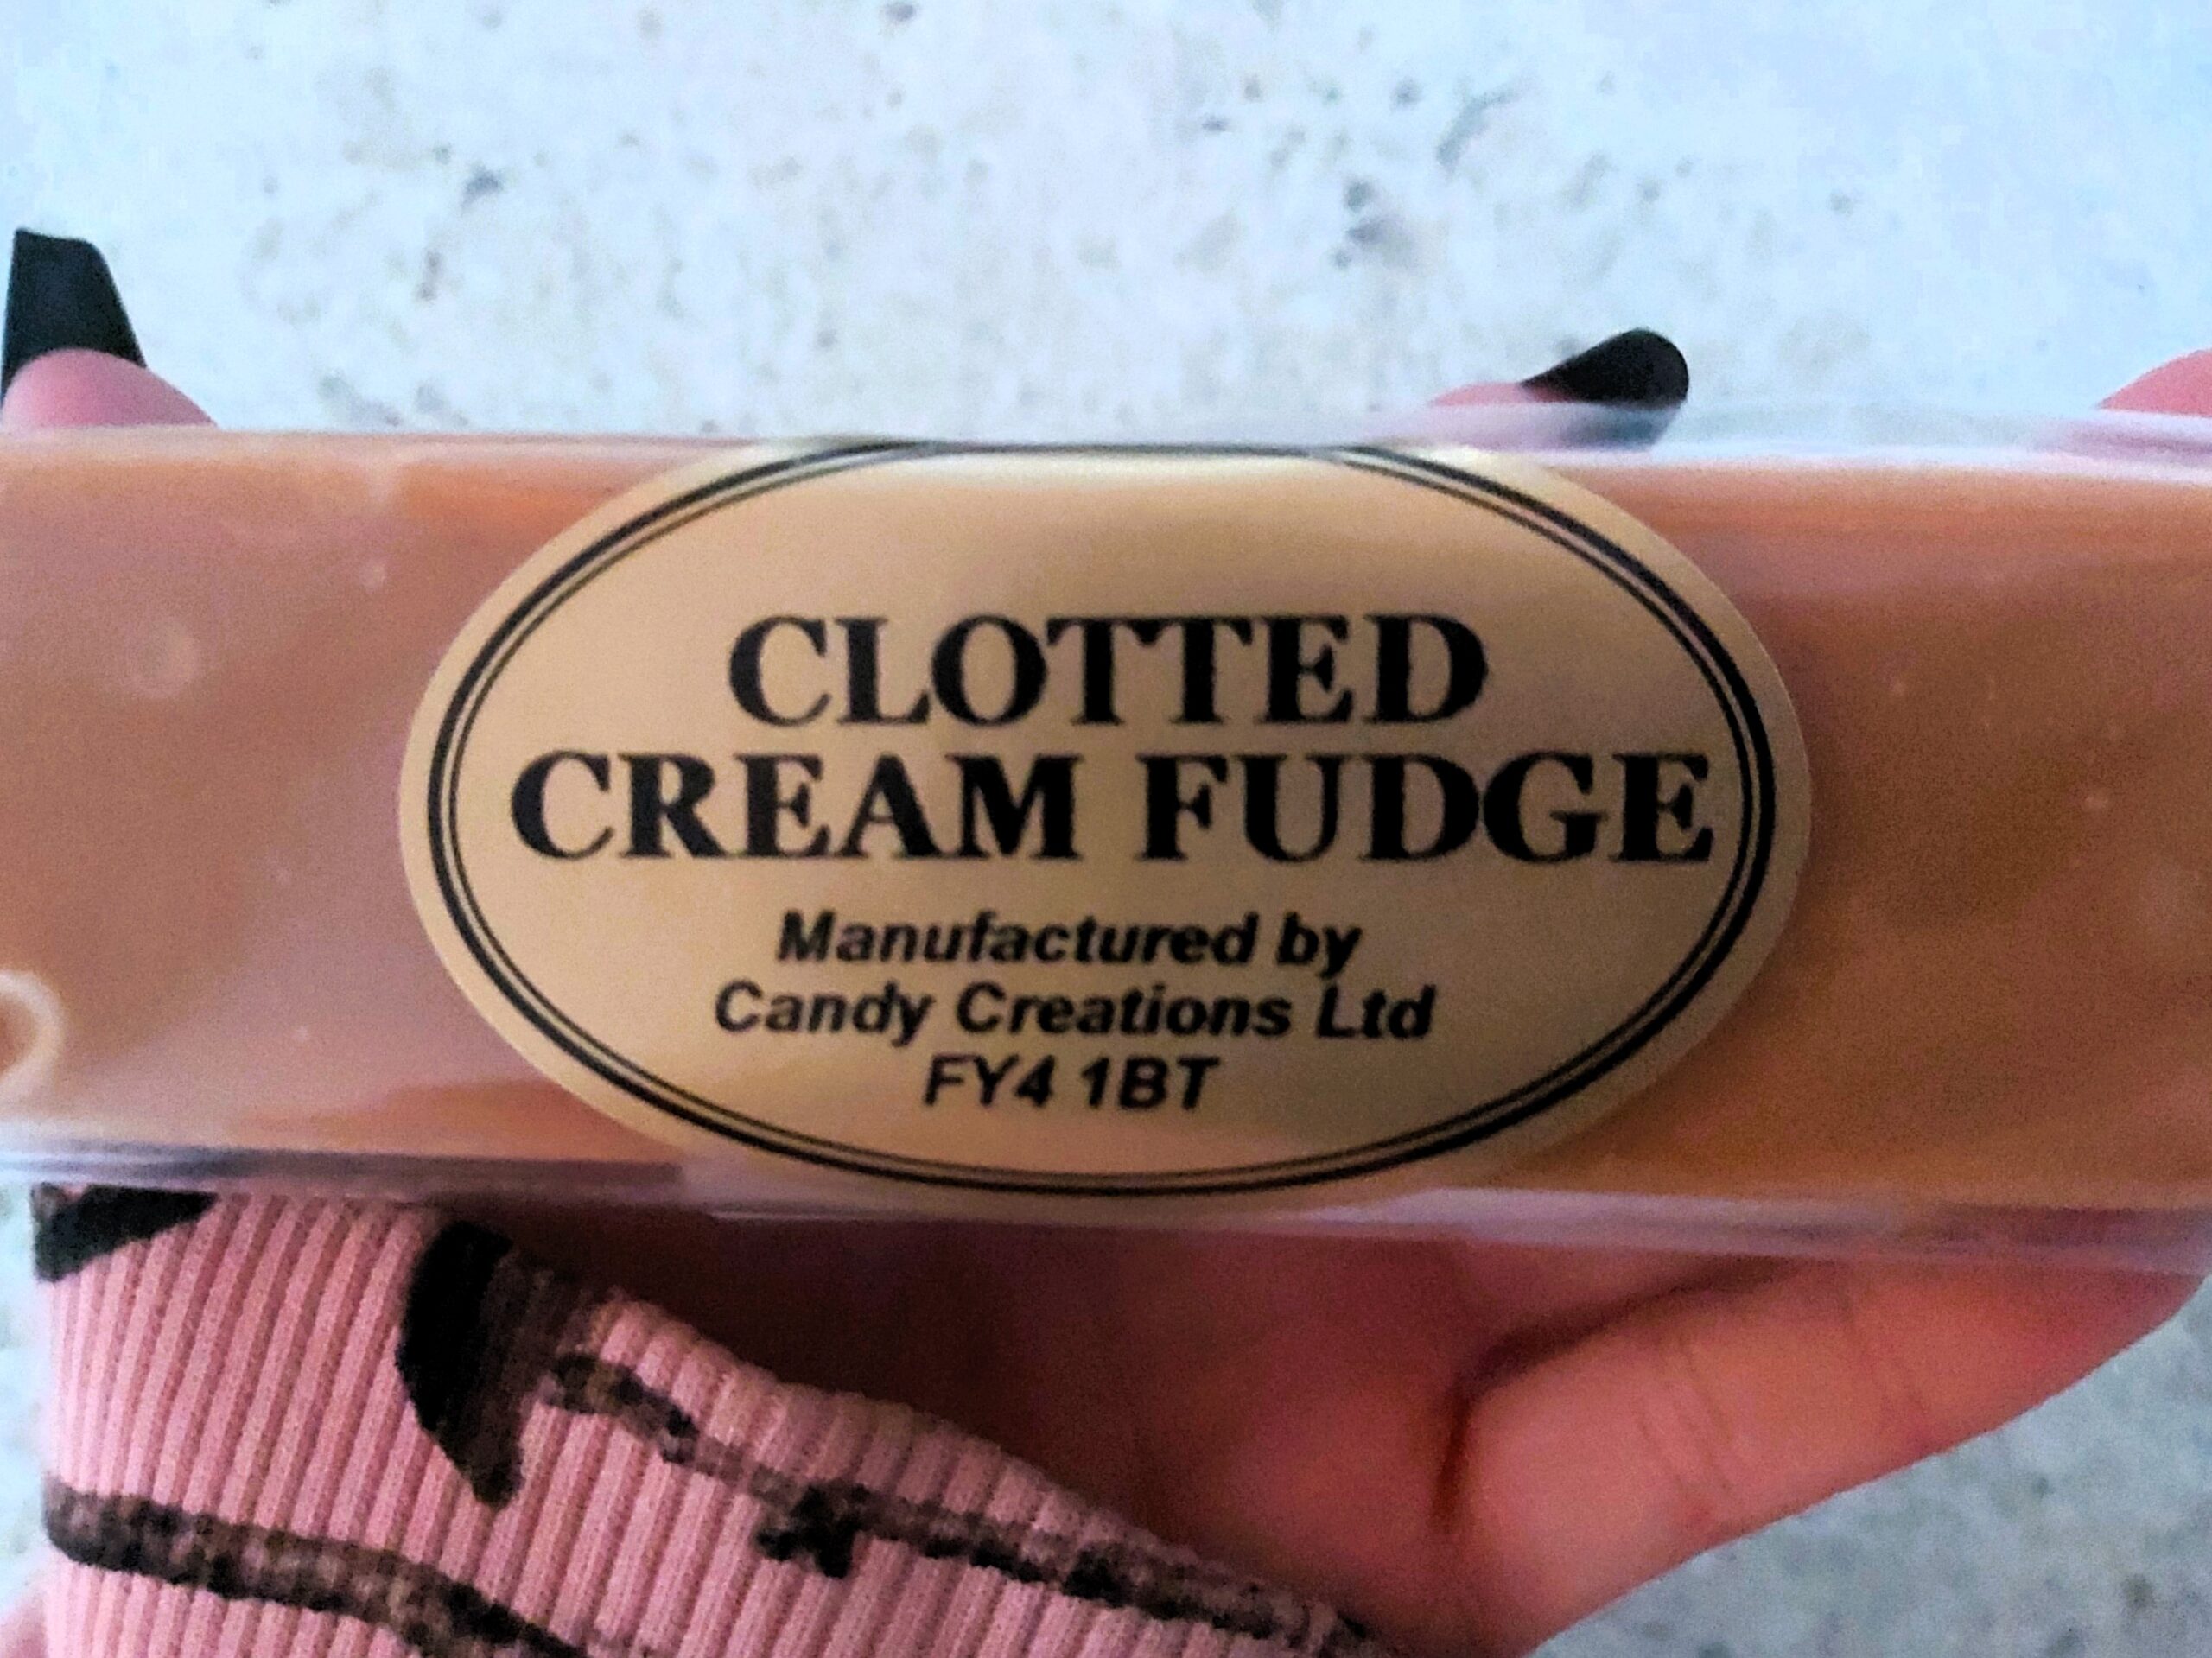 Wandering Lewis, with long black nails, holds clotted cream fudge, bought in Hastings, England